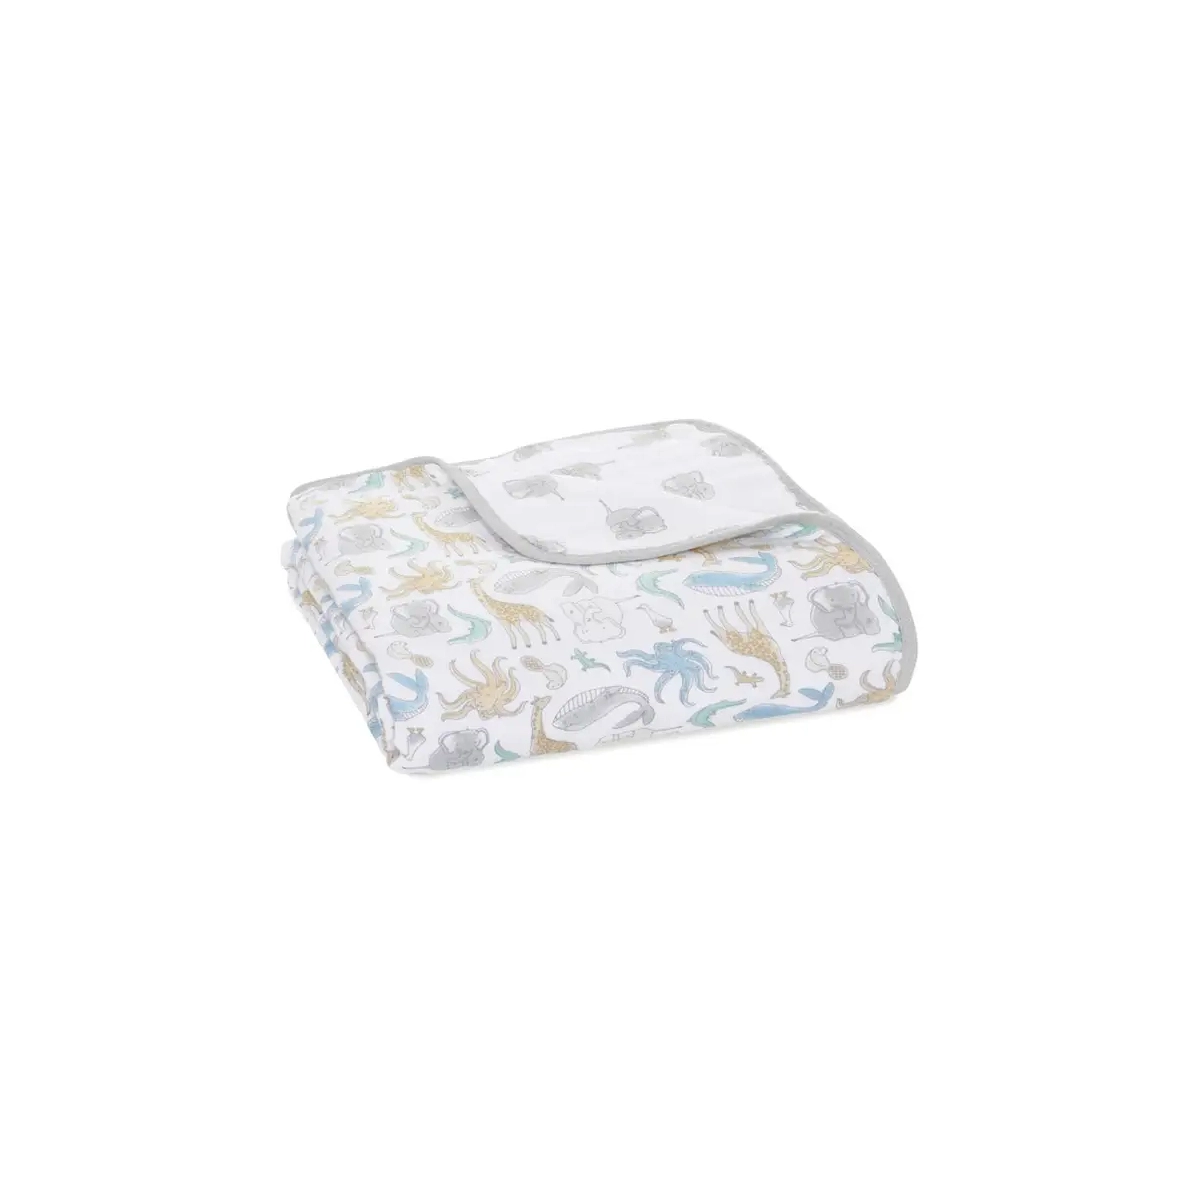 Image of Aden + Anais Essentials Cotton Muslin Blanket - Natural History